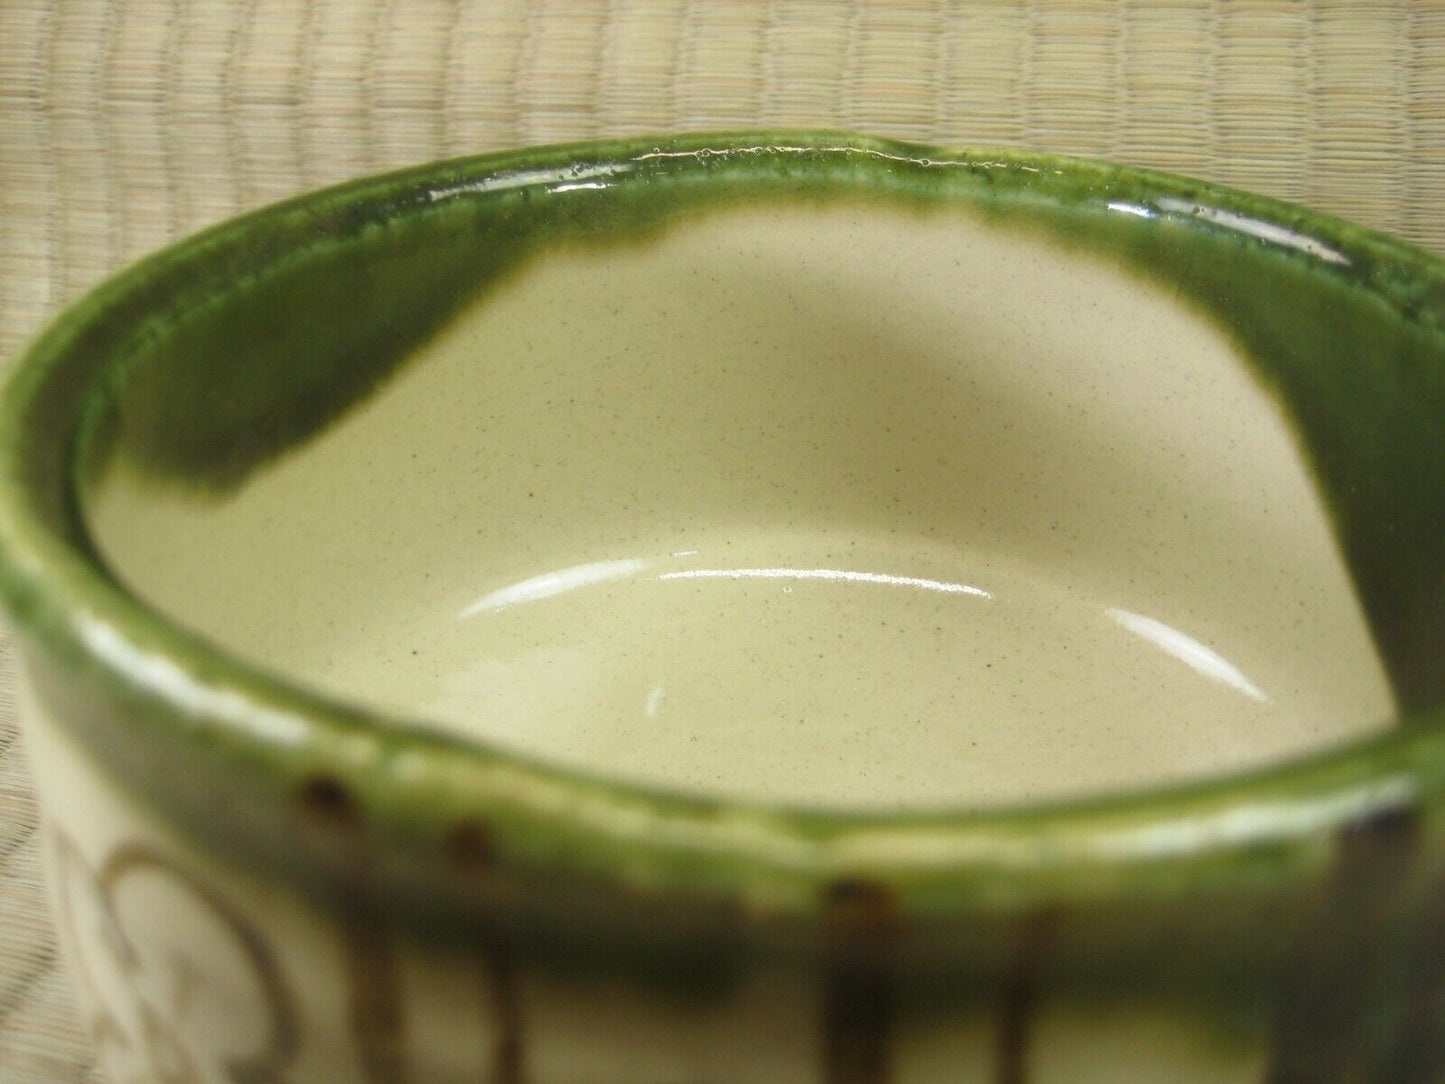 Vintage Japanese Green Oribe Wear Square Bowl With Fabric Textured Surface 5.5"